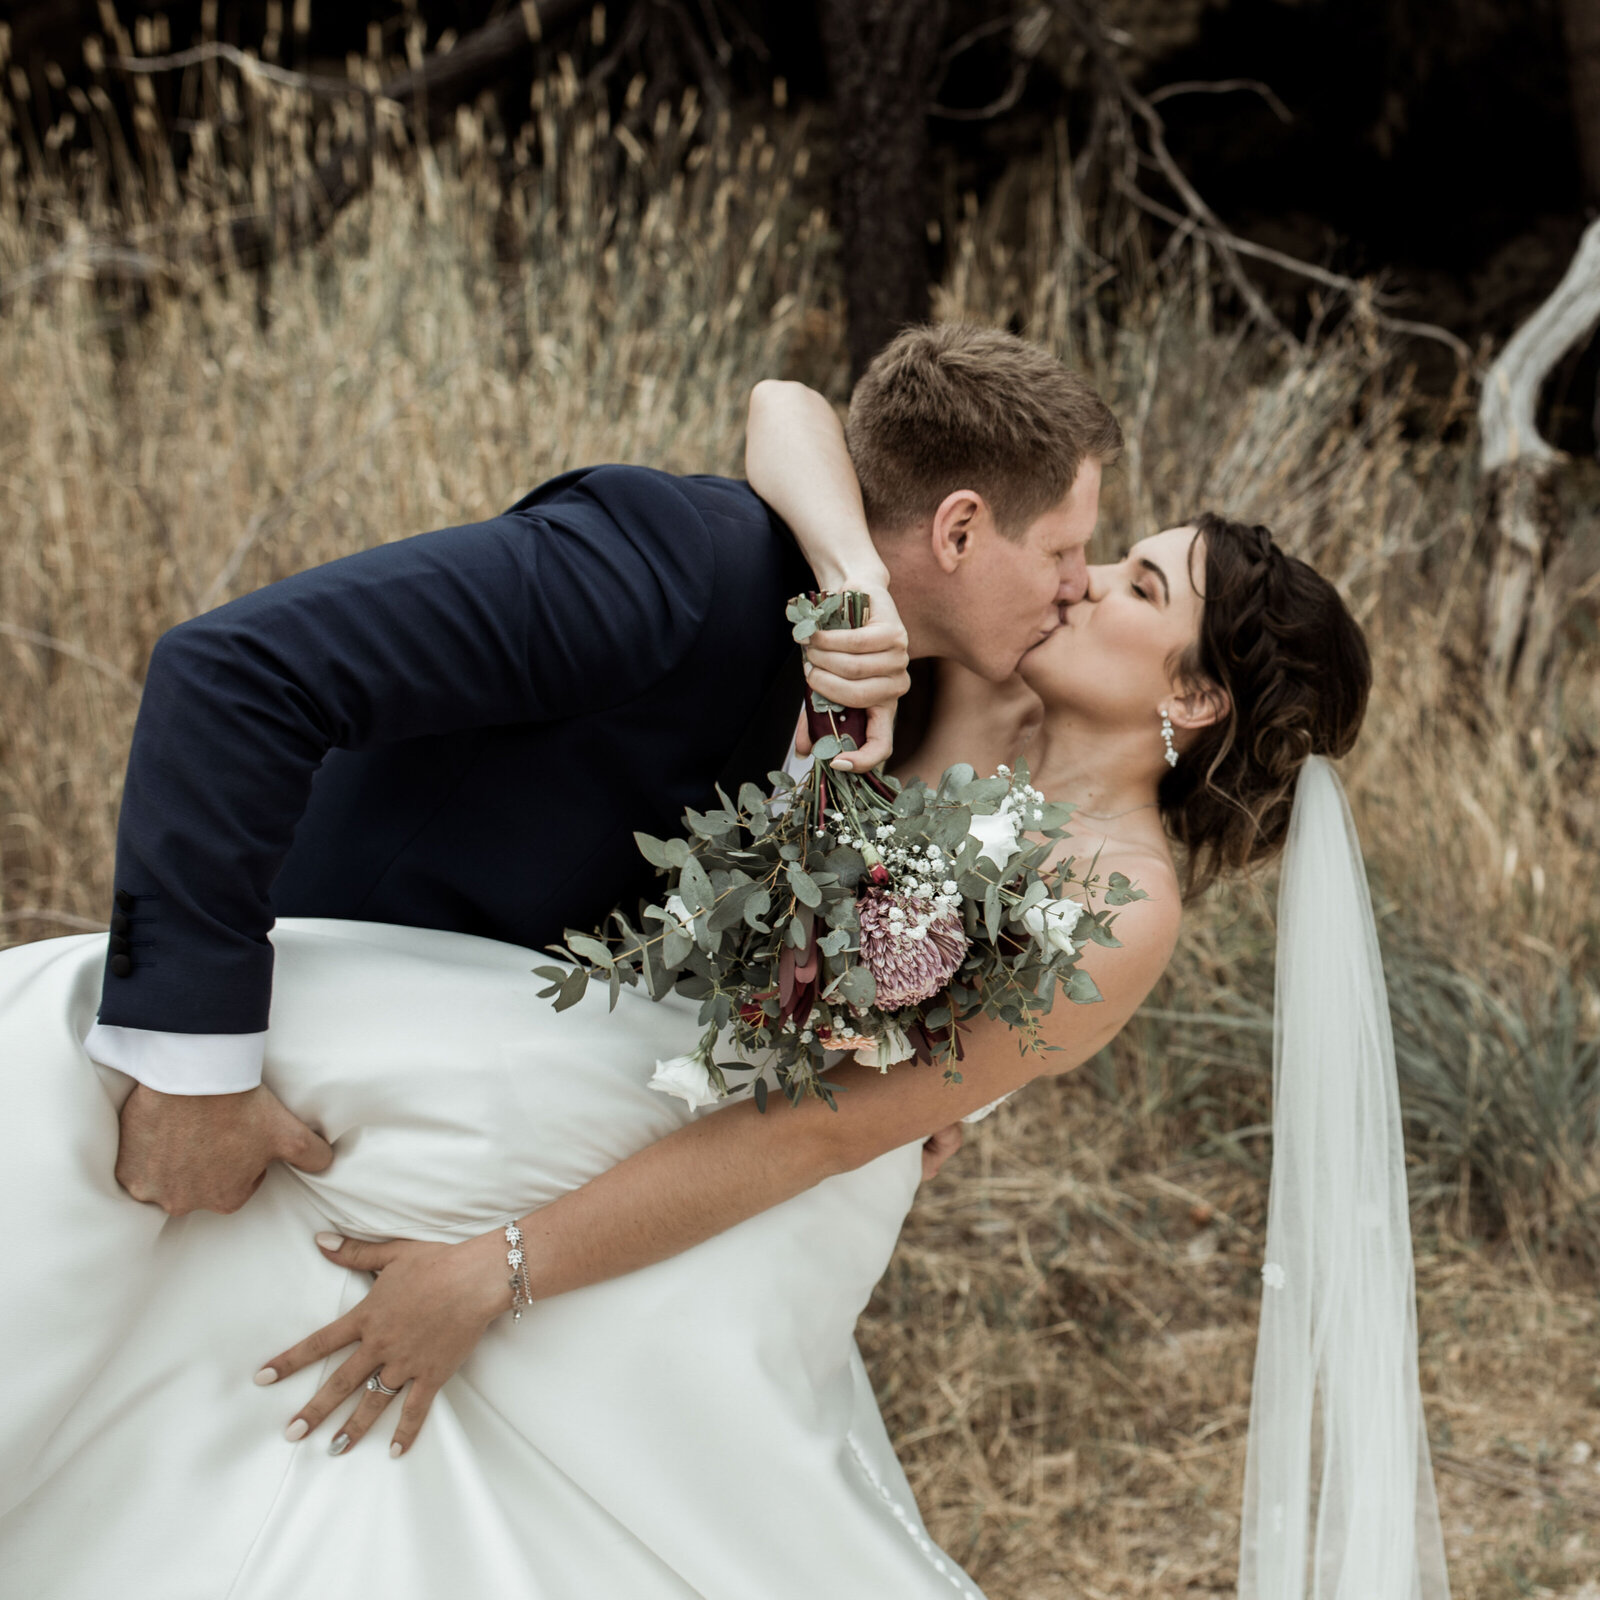 M&R-Anderson-Hill-Rexvil-Photography-Adelaide-Wedding-Photographer-620